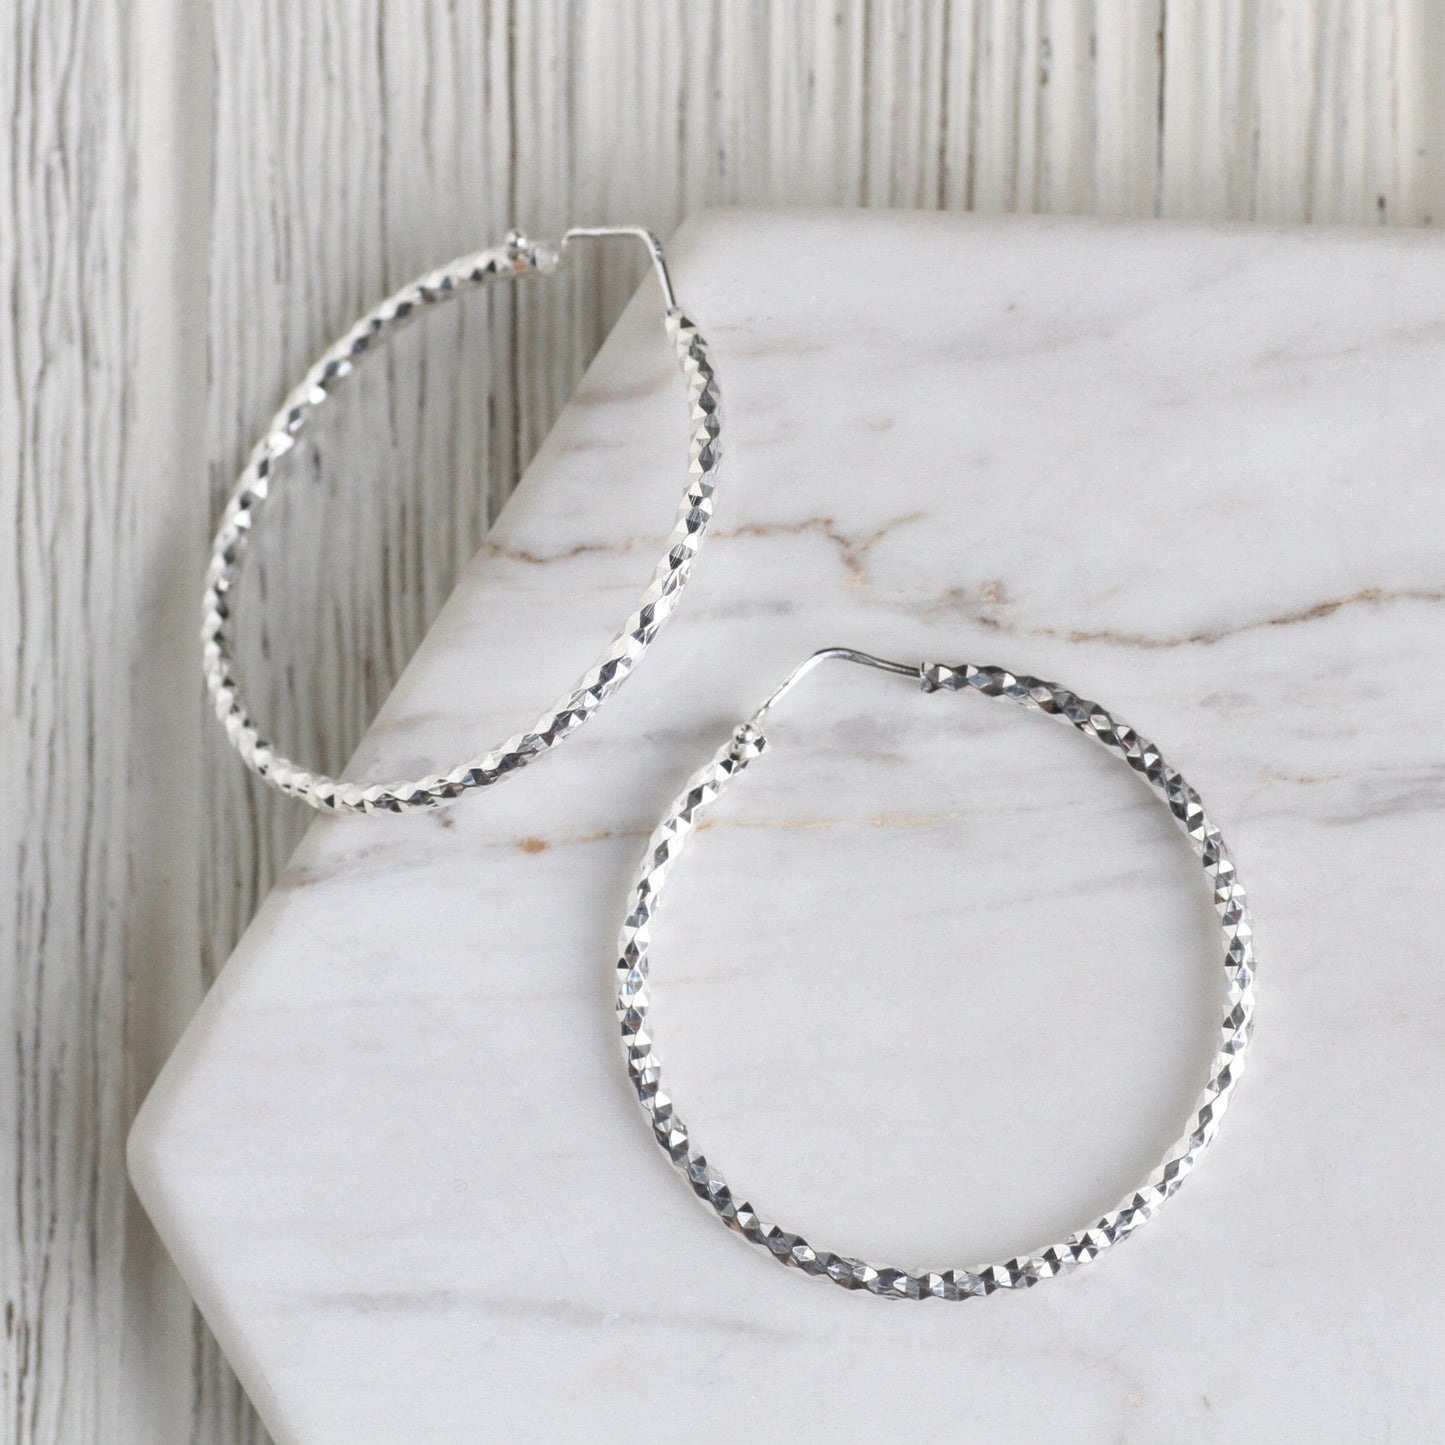 EAR Large Sterling Silver Faceted Hoops